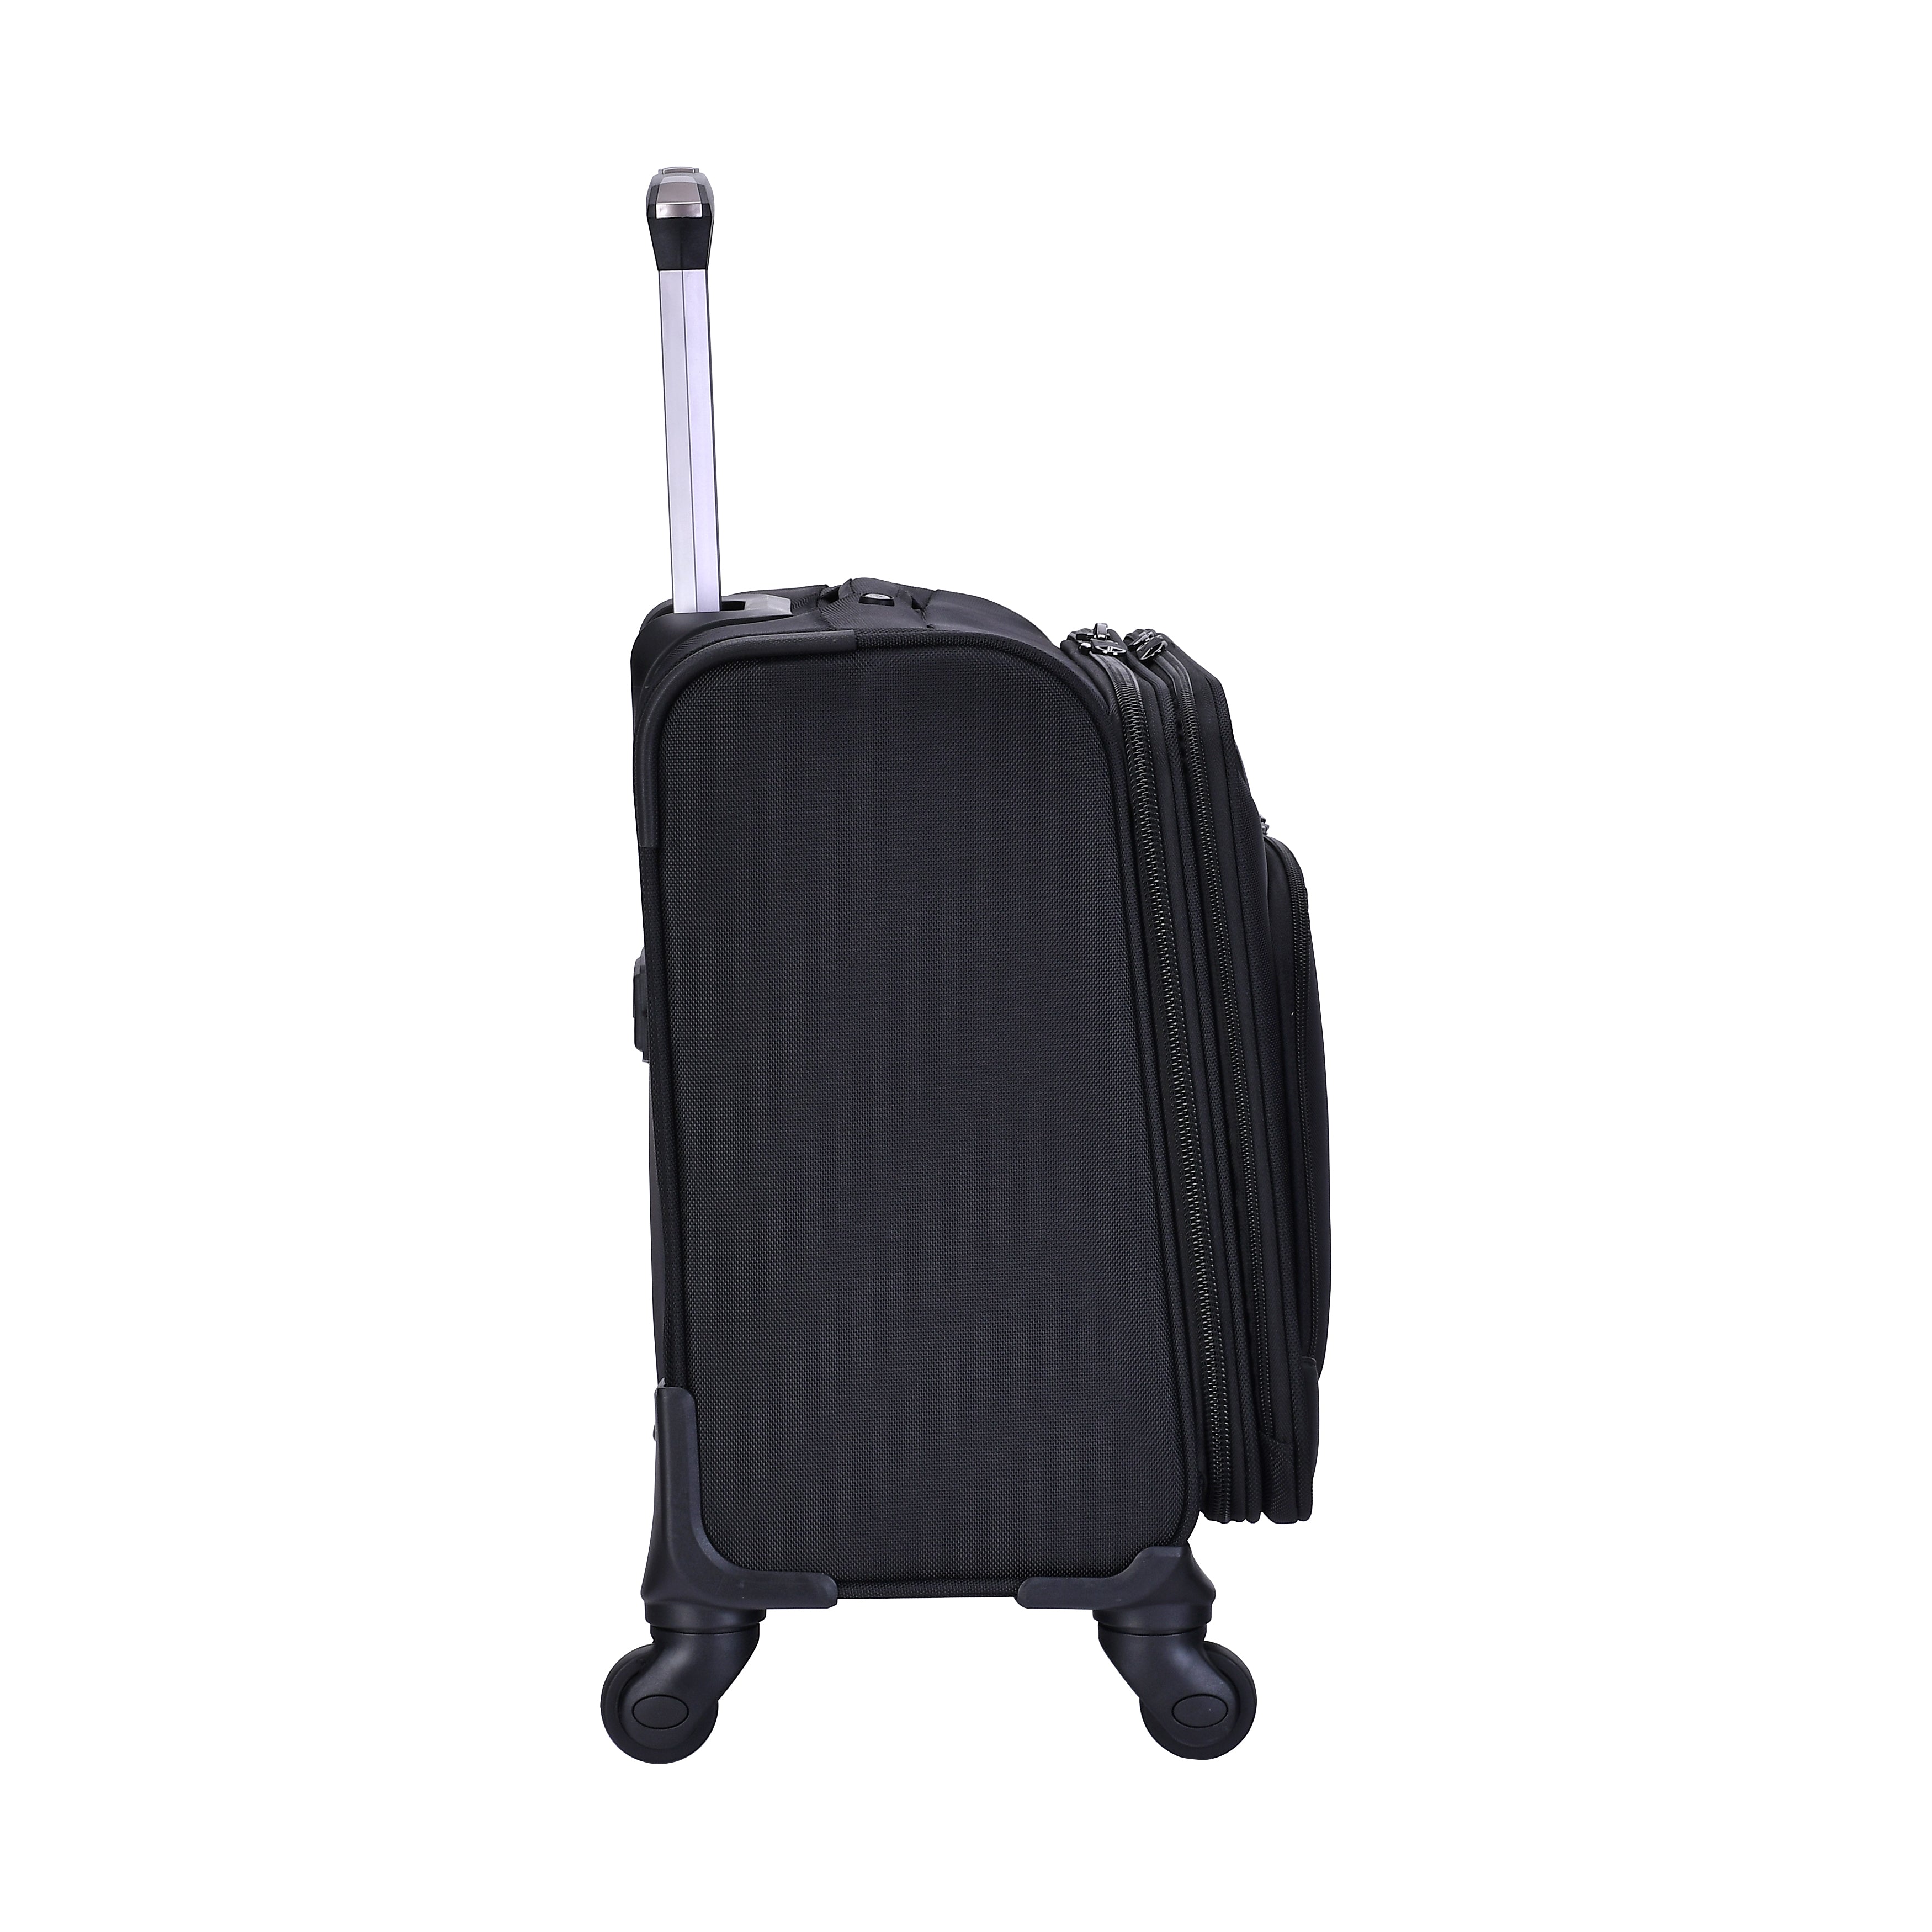 Eminent 4 360-degree Spinner Wheel Pilot Case Trolley water repellent rolling suitcase for Unisex, S0360-17